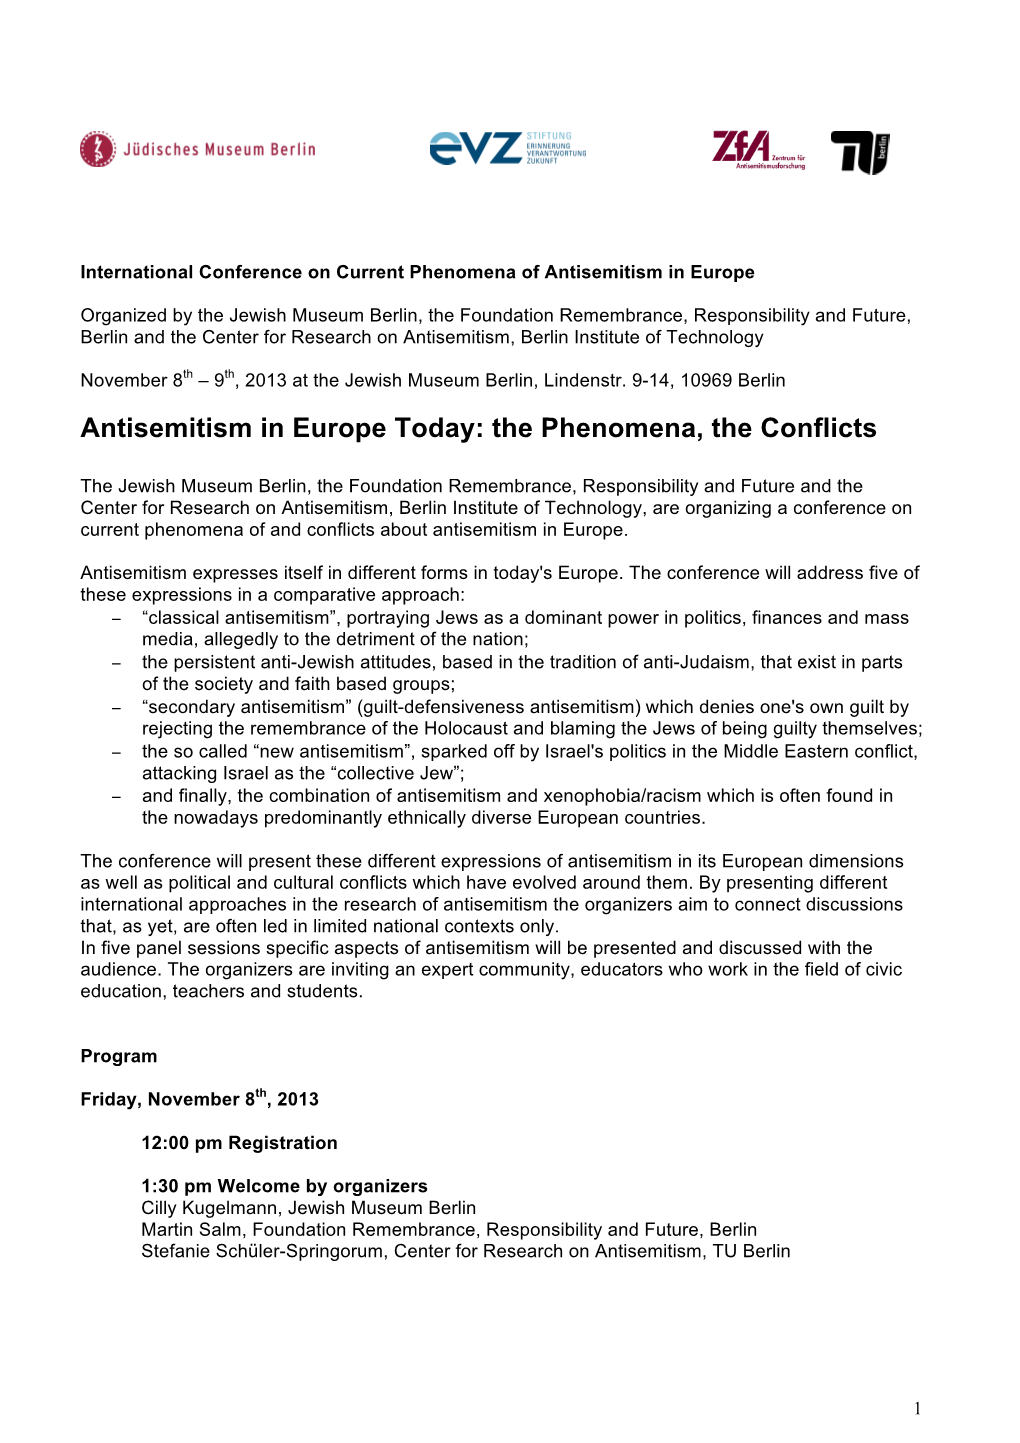 Antisemitism in Europe Today: the Phenomena, the Conflicts